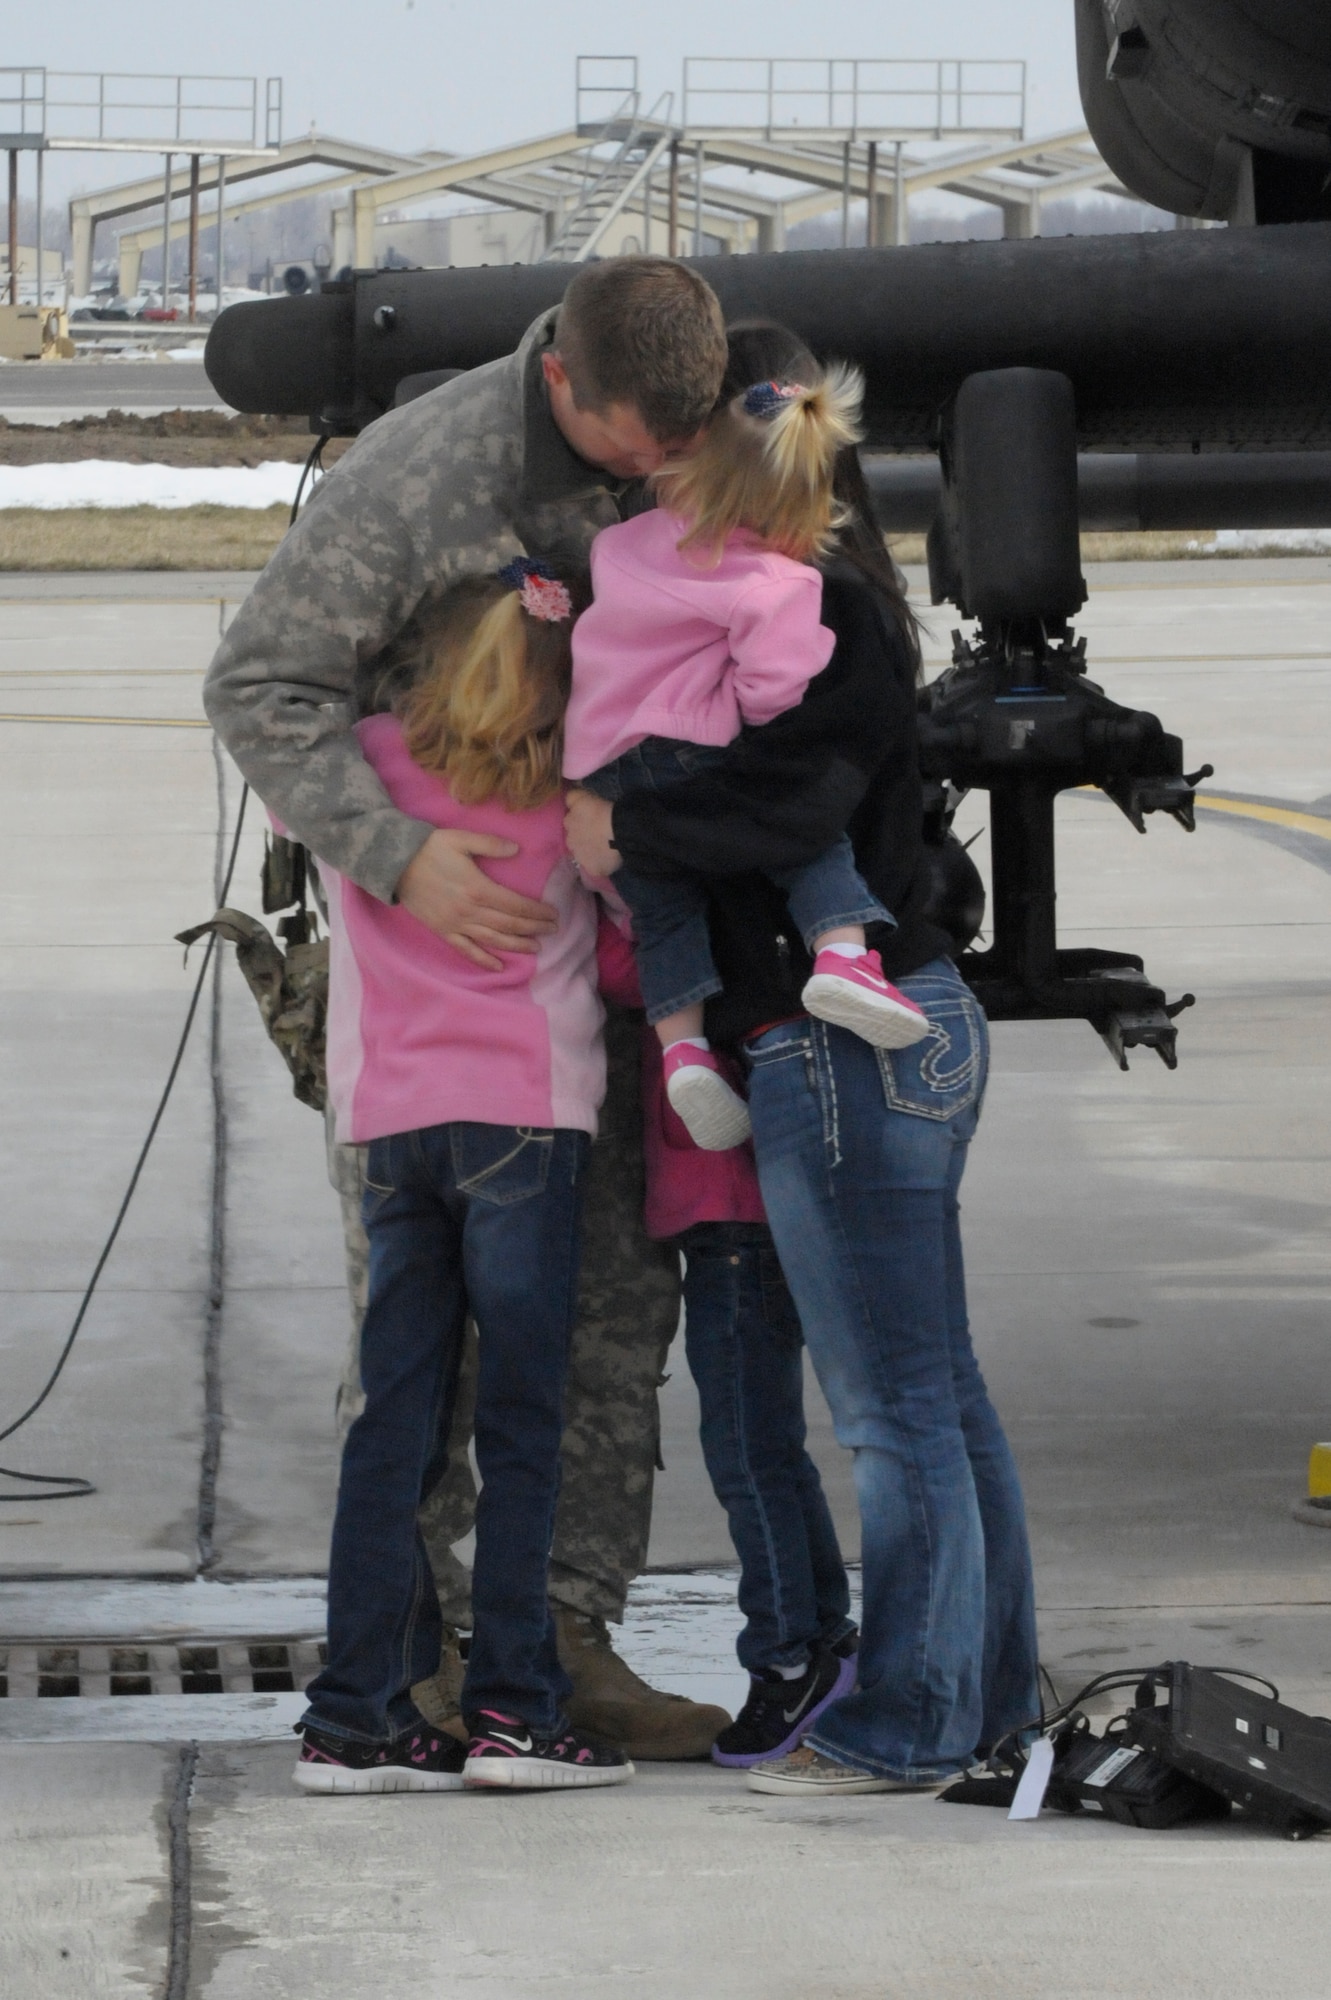 U.S. Army Chief Warrant Officer 3 Marcus Moore with the 1-135th Attack Reconnaissance Battalion at Whiteman Air Force Base, Mo., says goodbye to his family March 27, 2013, before his deployment to Afghanistan. Moore and his counterparts will be deployed for more than a year. (U.S. Air Force photo by Airman 1st Class Shelby R. Orozco/Released)